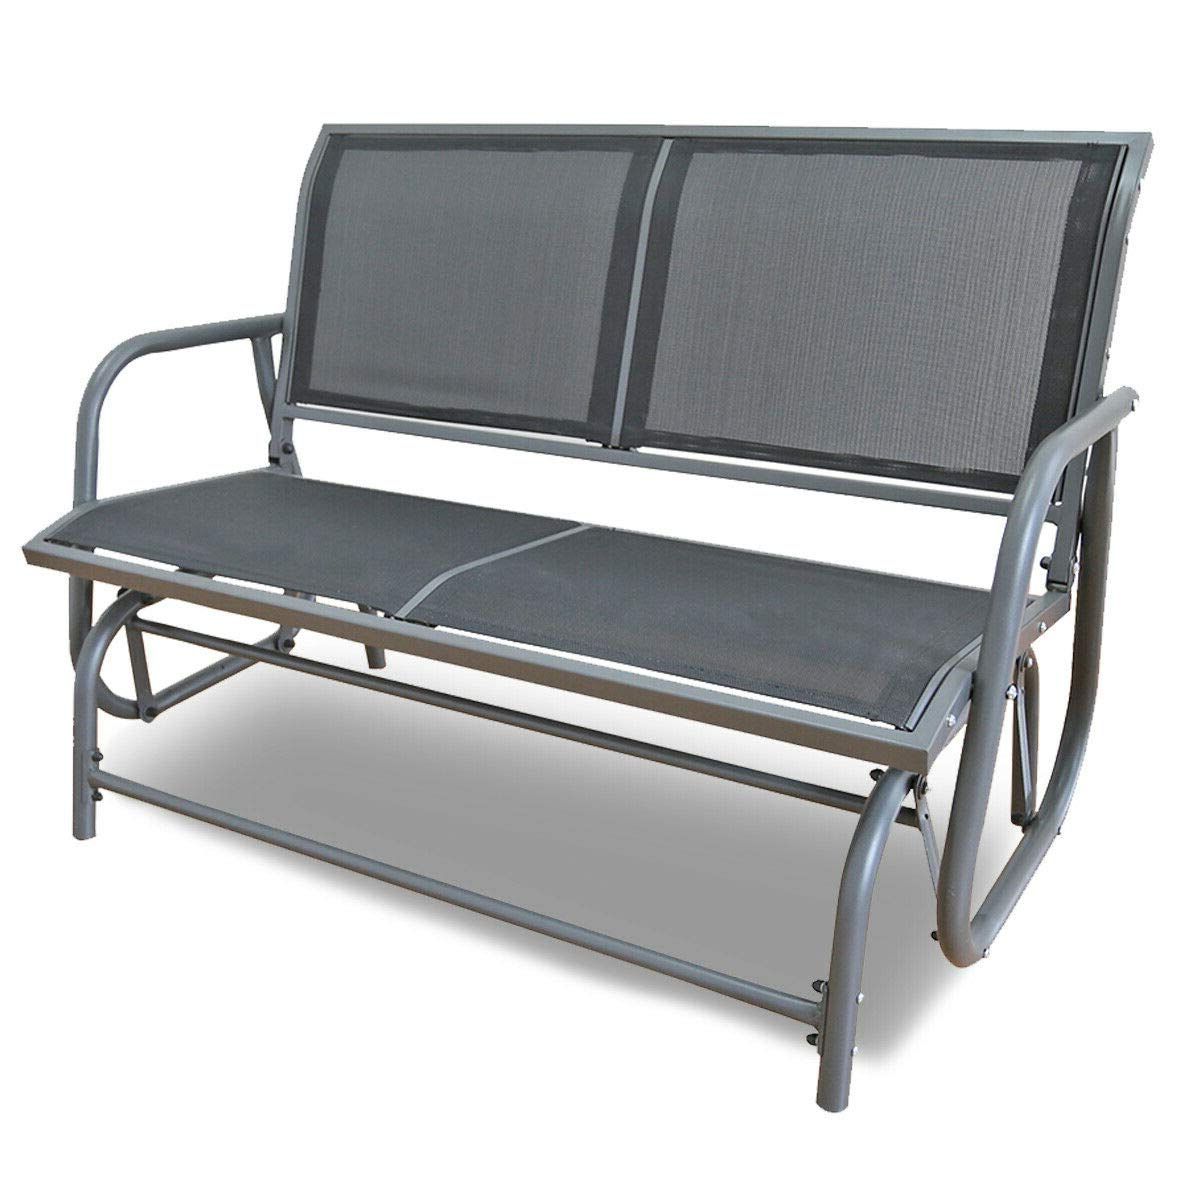 Outdoor Patio Swing Glider Bench Chairs For Most Up To Date Amazon : Grey Patio Swing Glider Bench For 2 Persons (View 1 of 30)